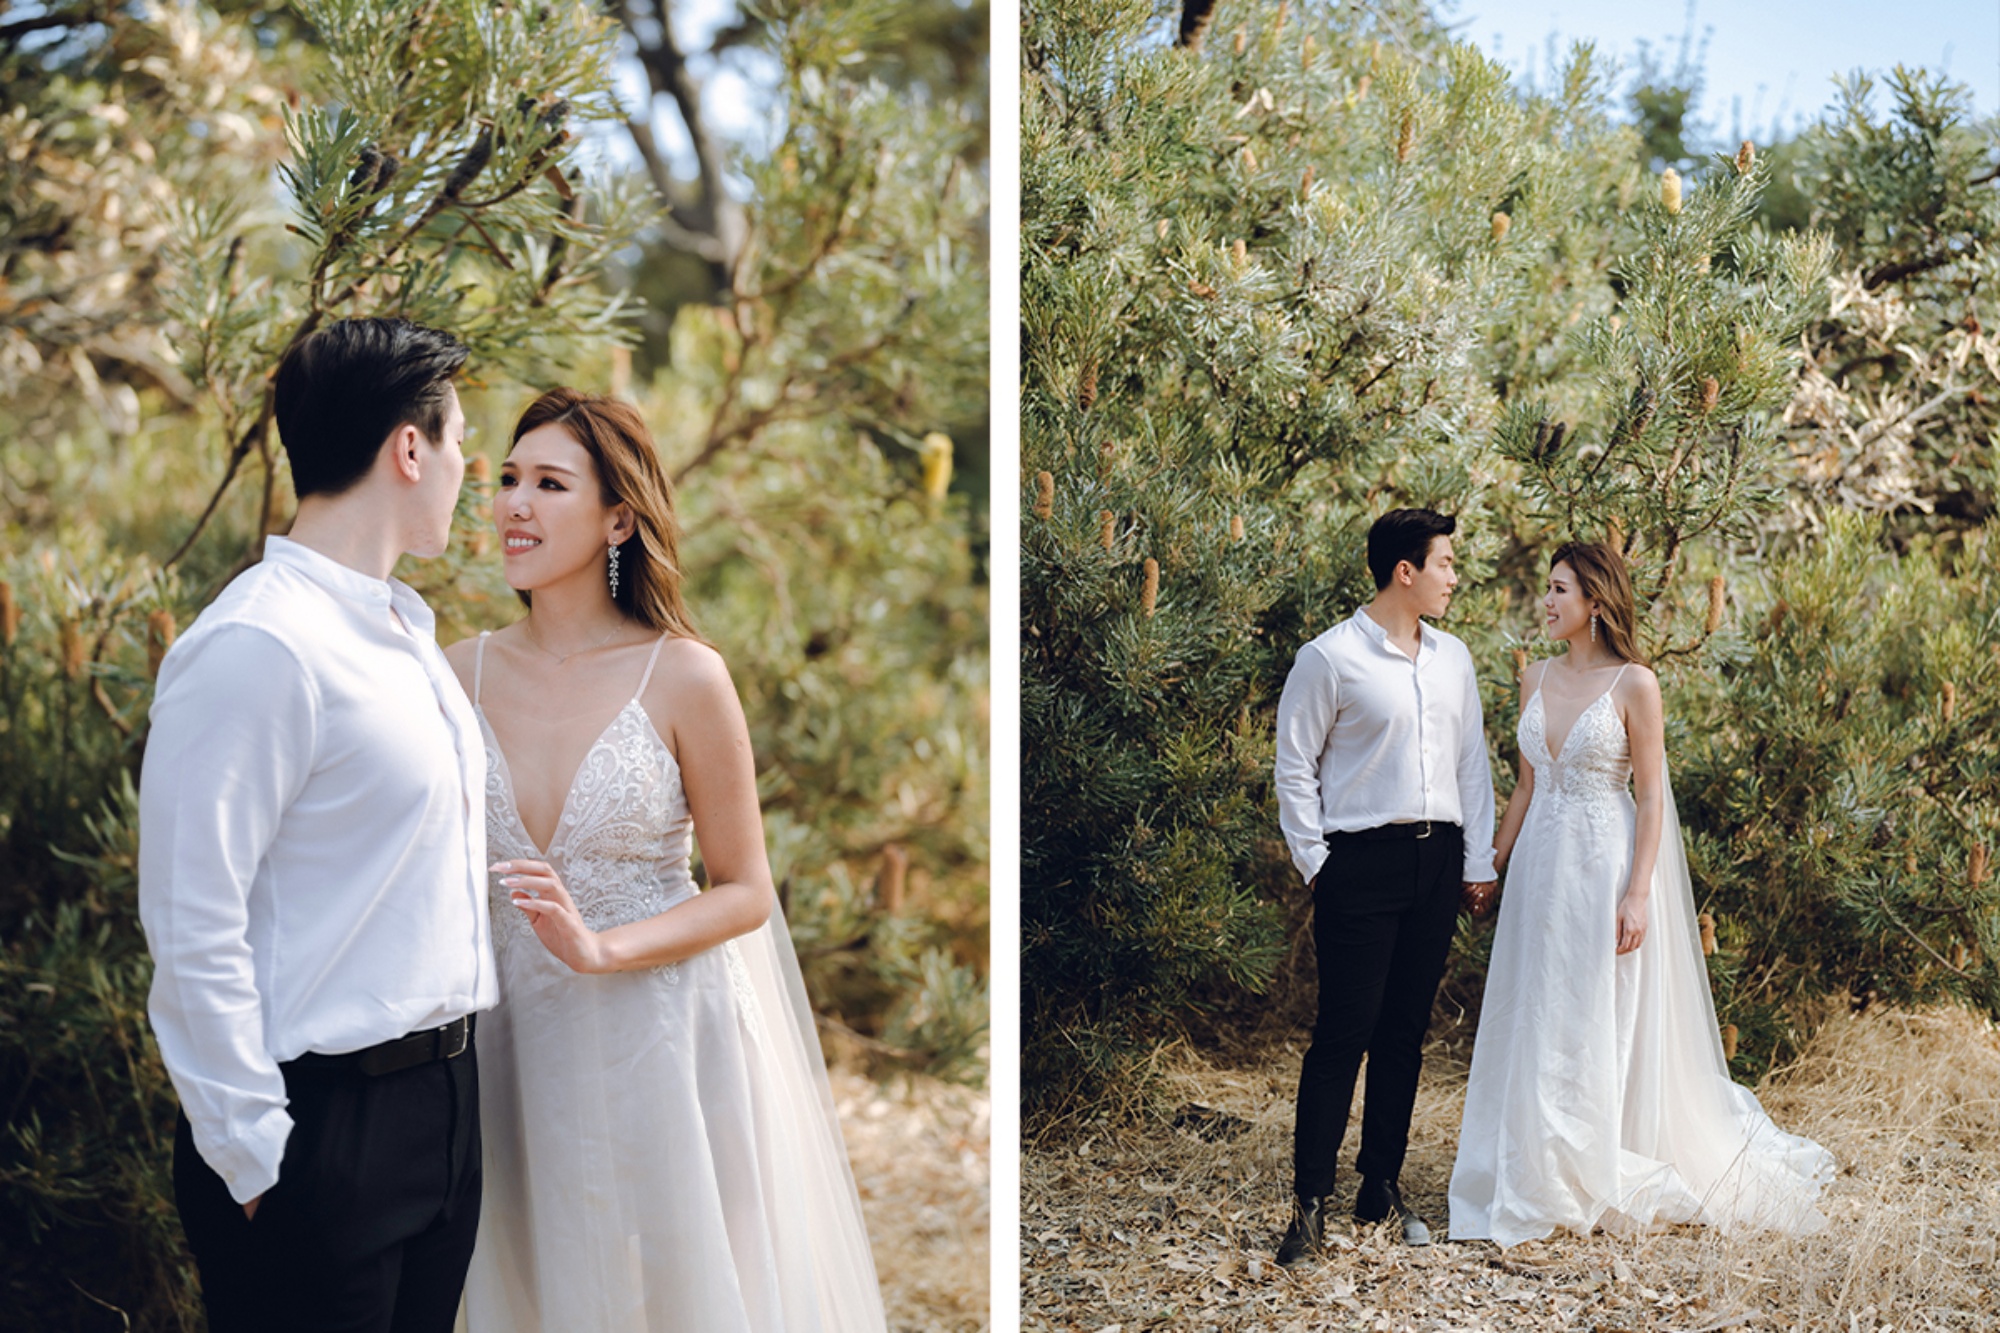 Capturing Forever in Perth: Jasmine & Kamui's Pre-Wedding Story by Jimmy on OneThreeOneFour 11